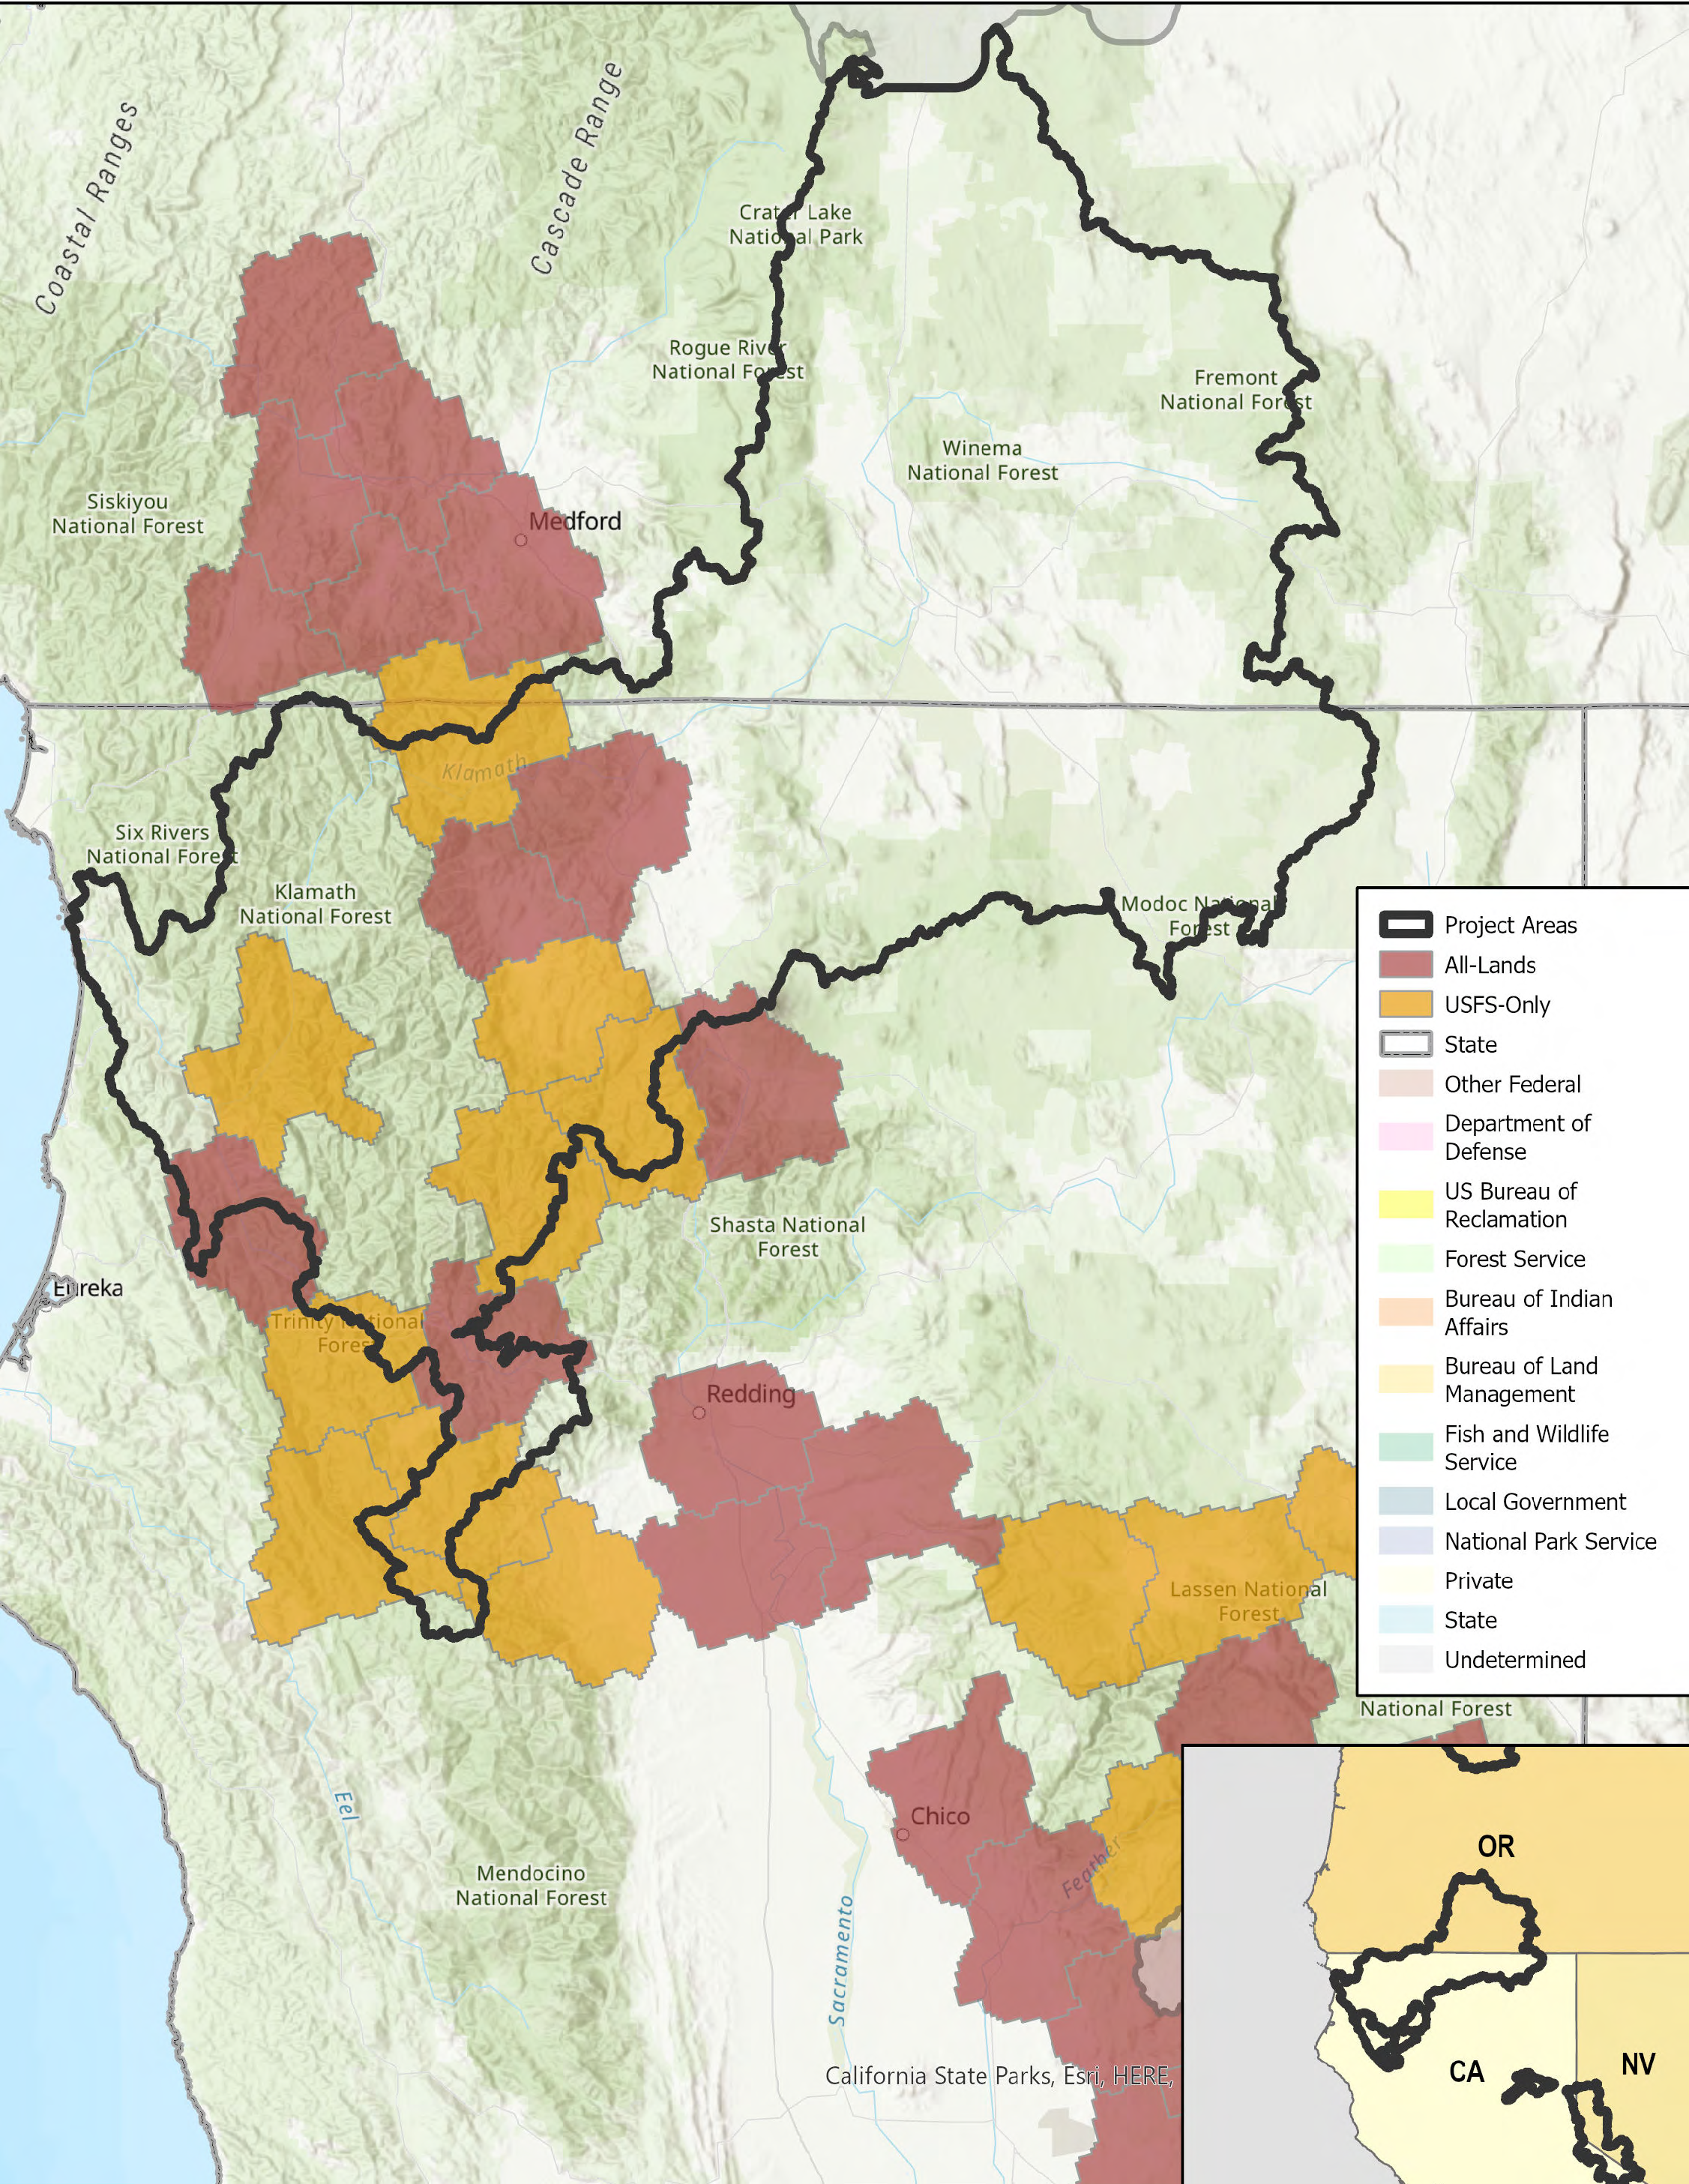 This map shows the Klamath National Forest areas to be treated, part of the Wildfire Crisis Strategy